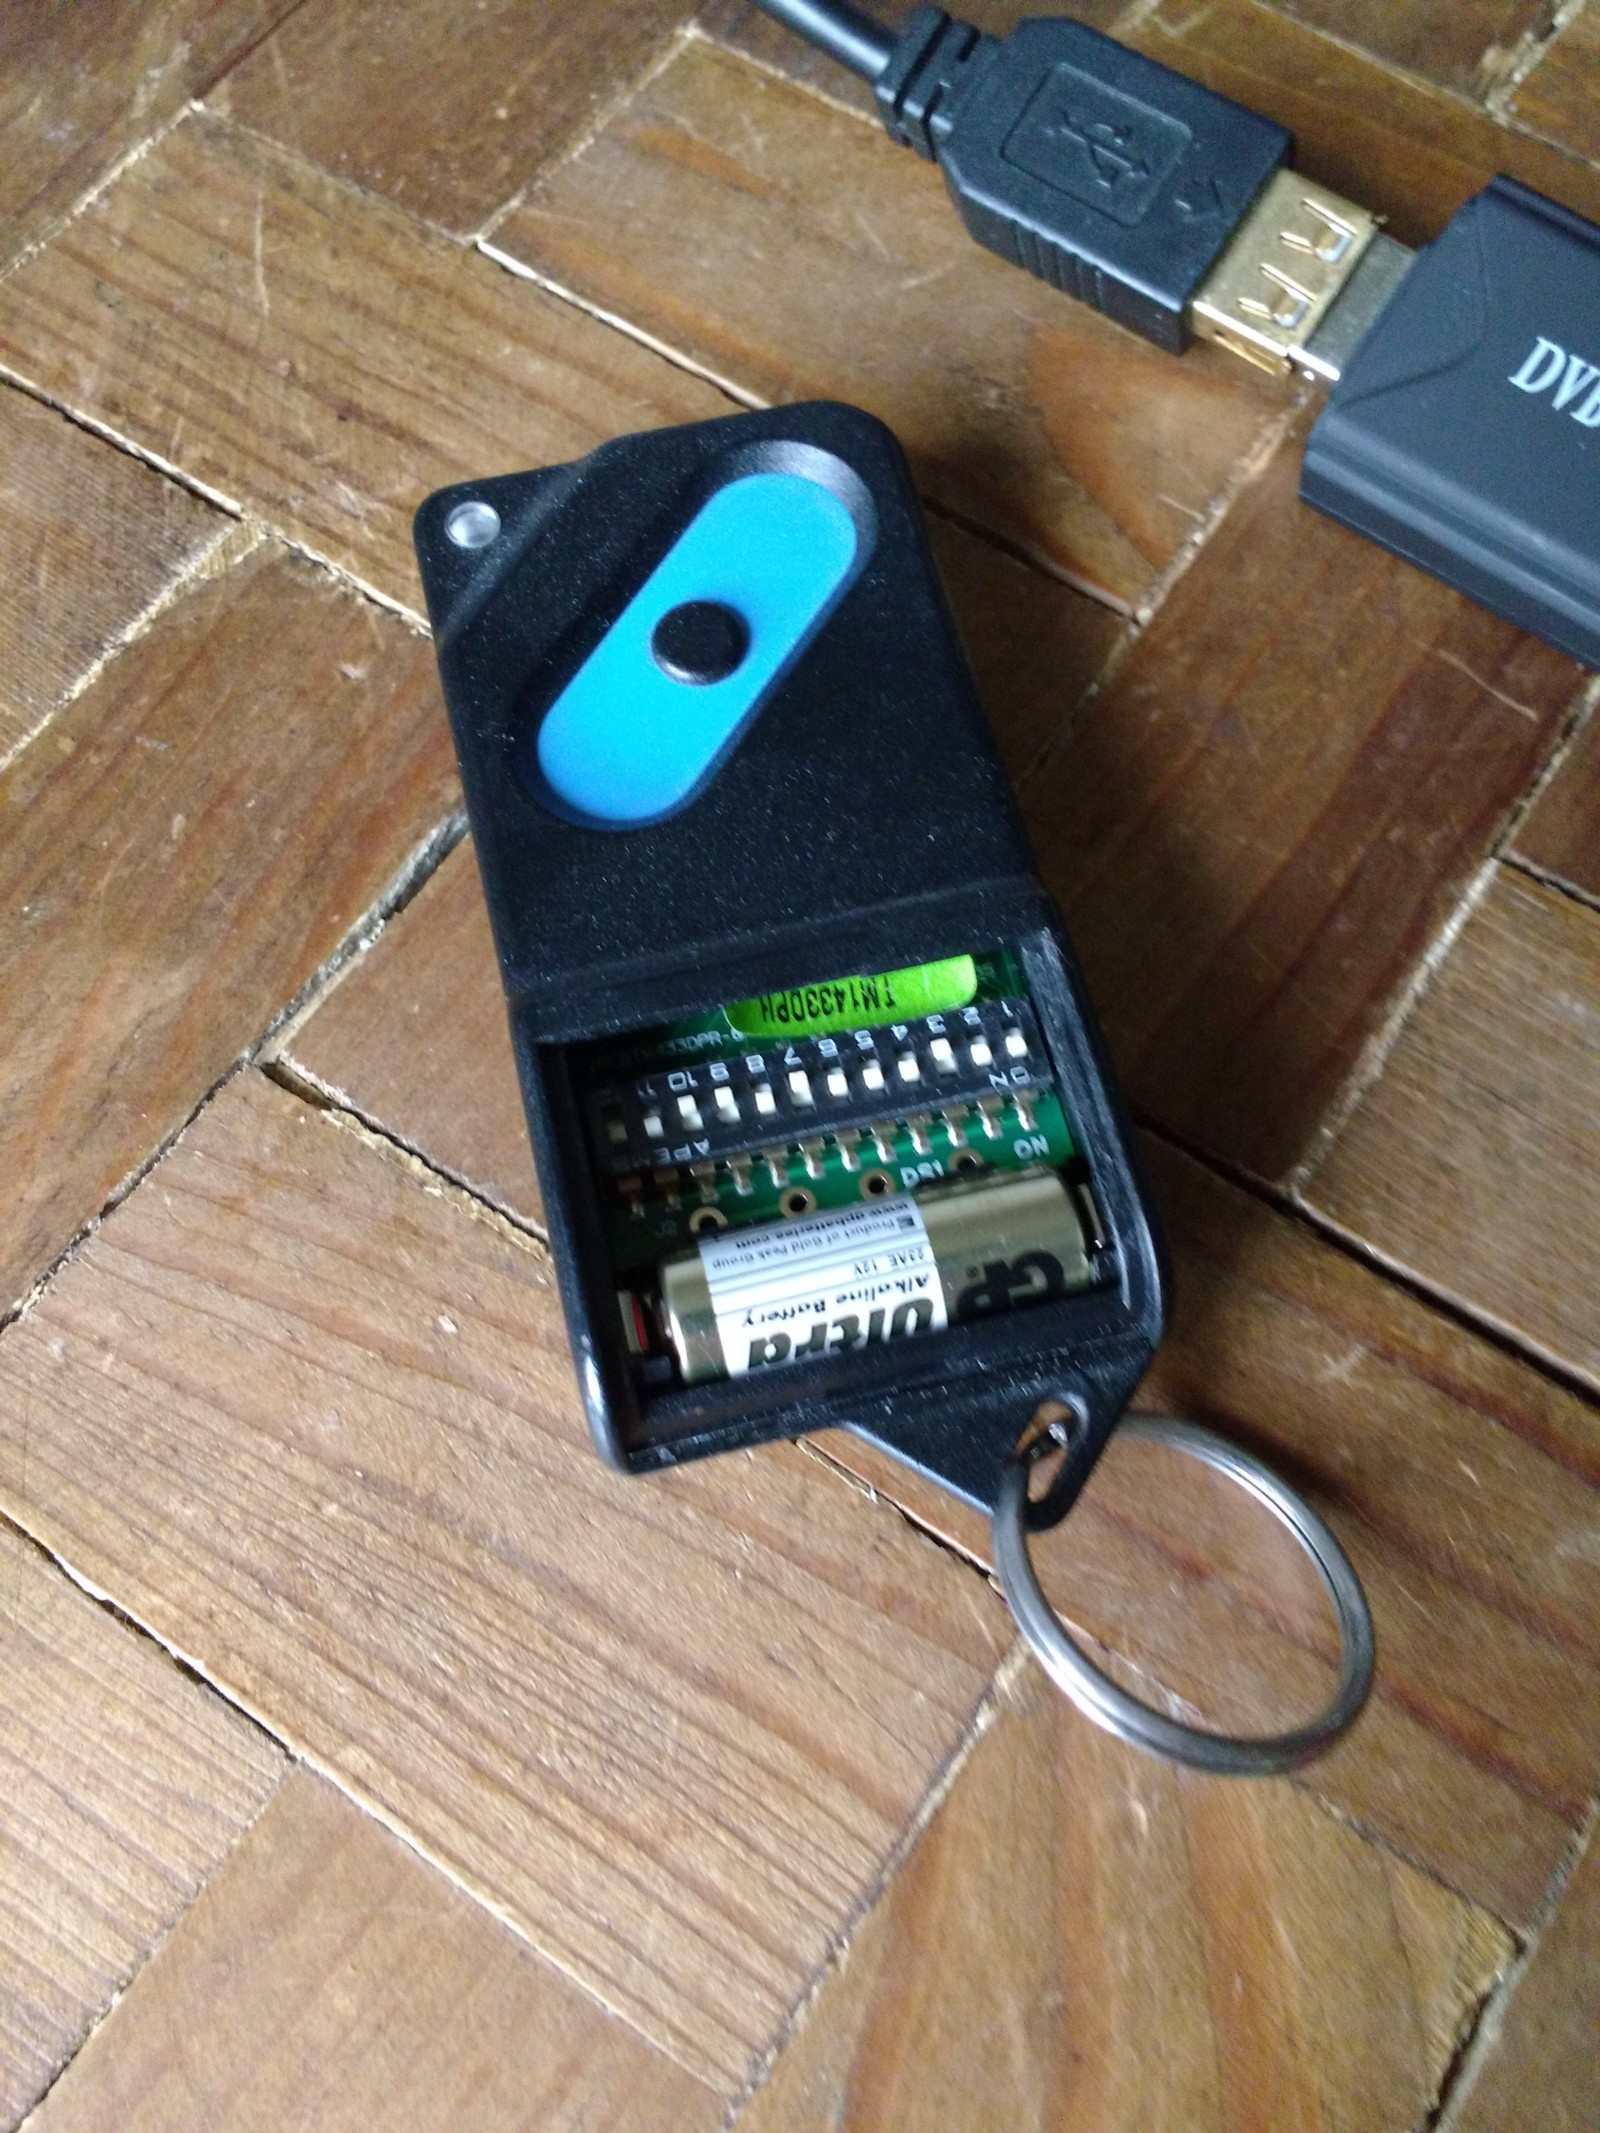 Decoding A Garage Door Opener With An Rtl Sdr Eoin Medium with proportions 1600 X 2133